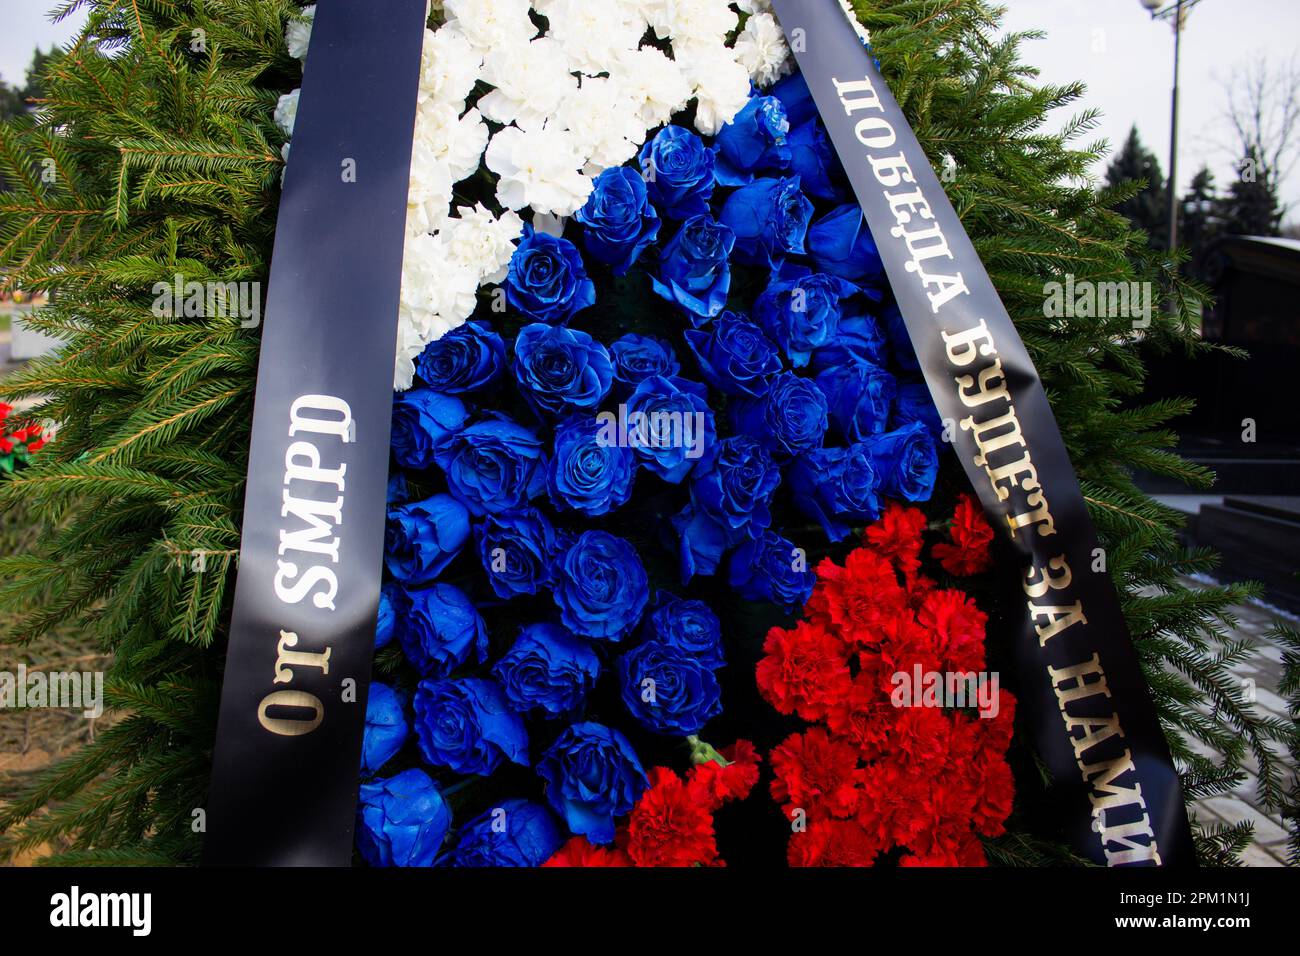 A funeral wreath is seen on the grave of Vladlen Tatarsky and the text reads: 'Victory will be ours' at Troyekurovskoye cemetery in Moscow. Maxim Fomin better known by his pen-name Vladlen Tatarsky was a convicted criminal who escaped from prison and made a name for himself as a Ukrainian-born Russian military blogger and a participant in the war between Russian and Ukraine. He was active as a propagandist for the Russian side in the war until he was murdered in a terrorist act in St. Petersburg on April 2, 2023. 26-year-old woman named Darya Trepova was arrested for the bombing that had kille Stock Photo